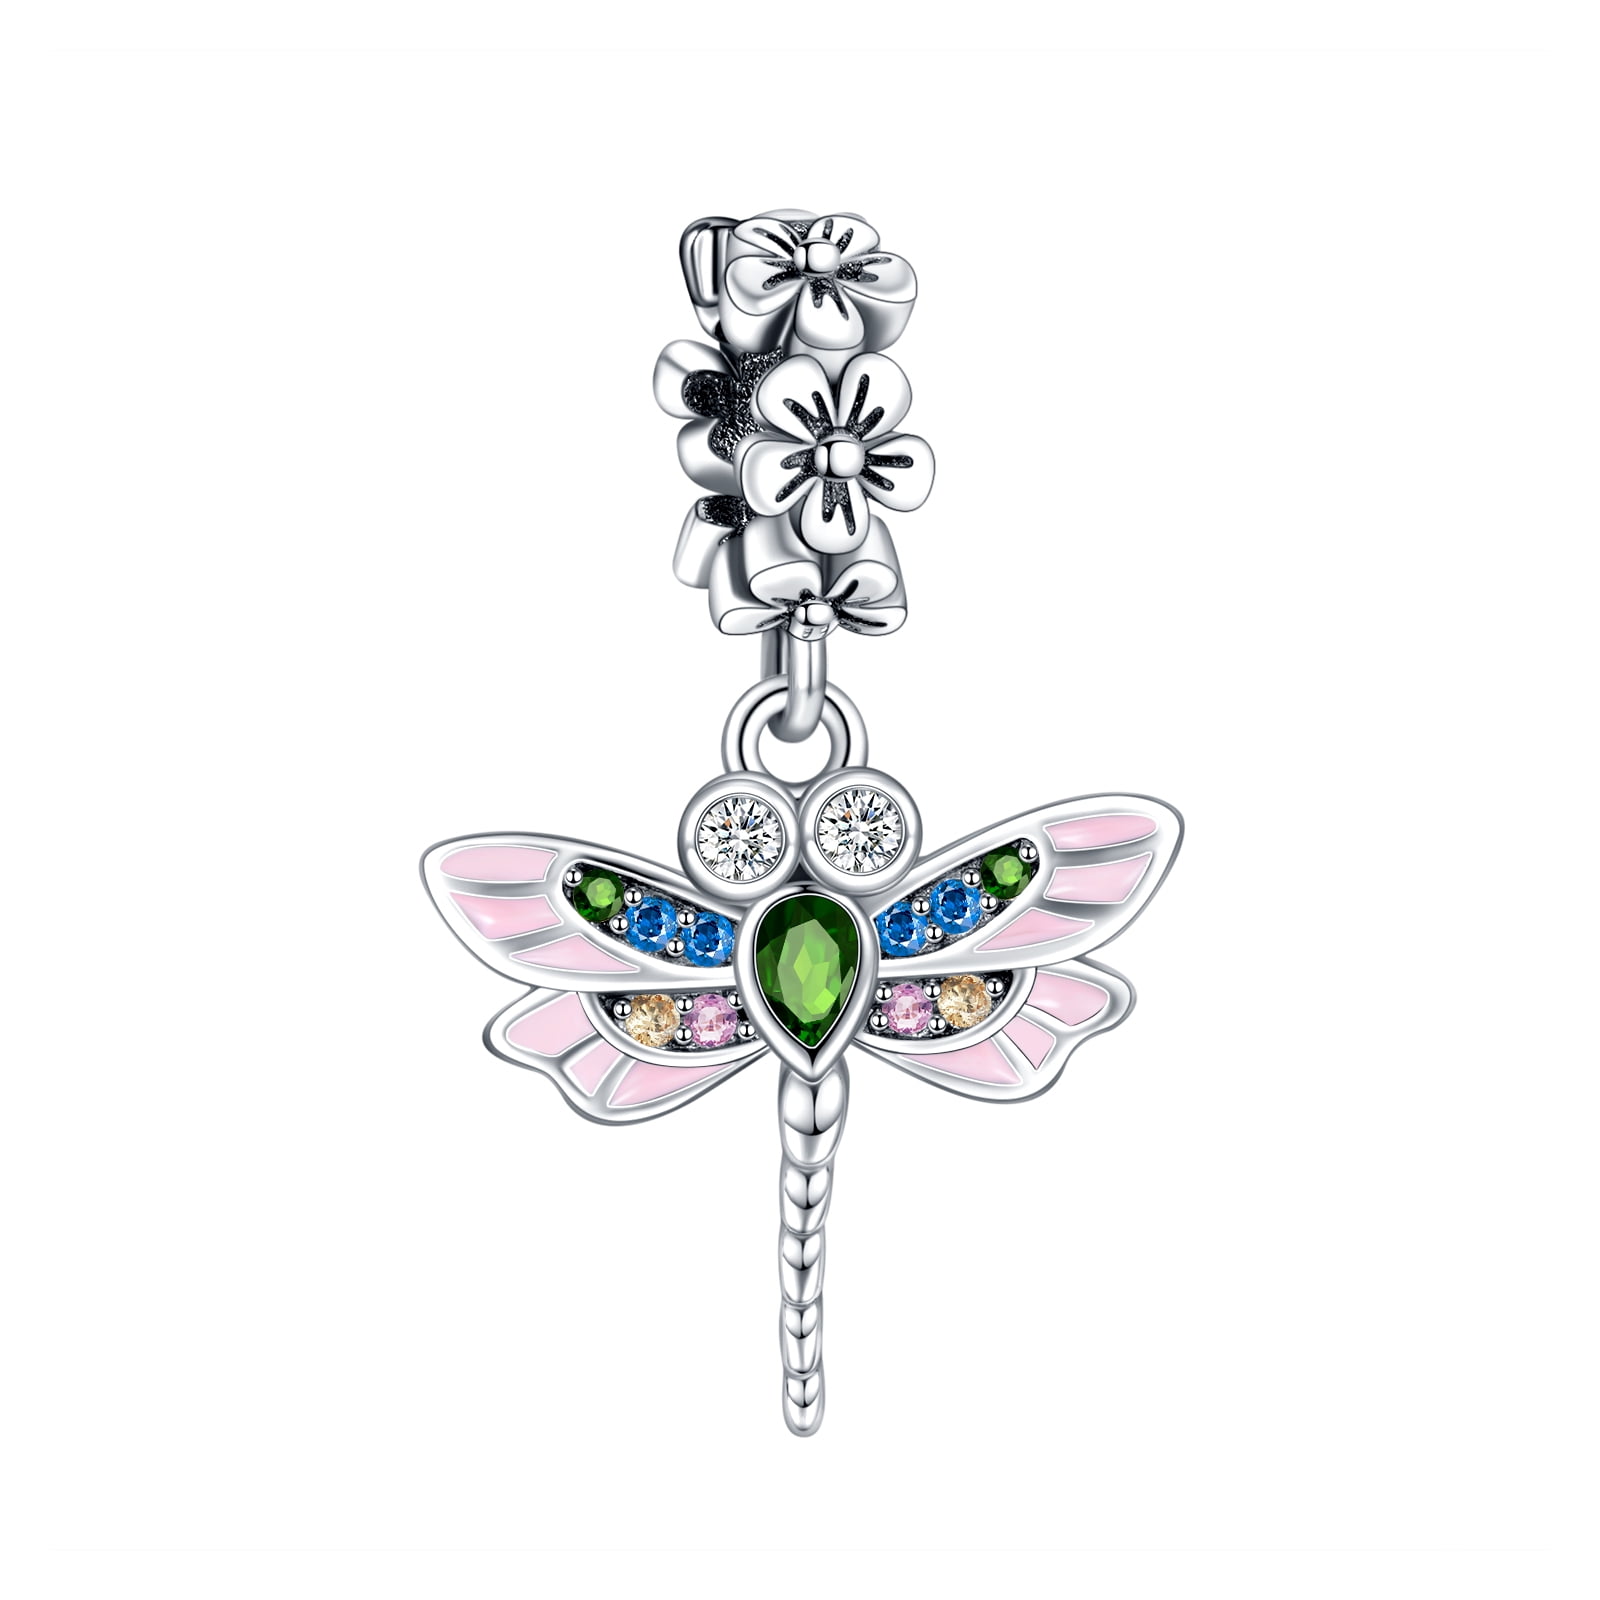 Dragonfly Necklace | Blackberry Designs Jewelry | Reviews on Judge.me